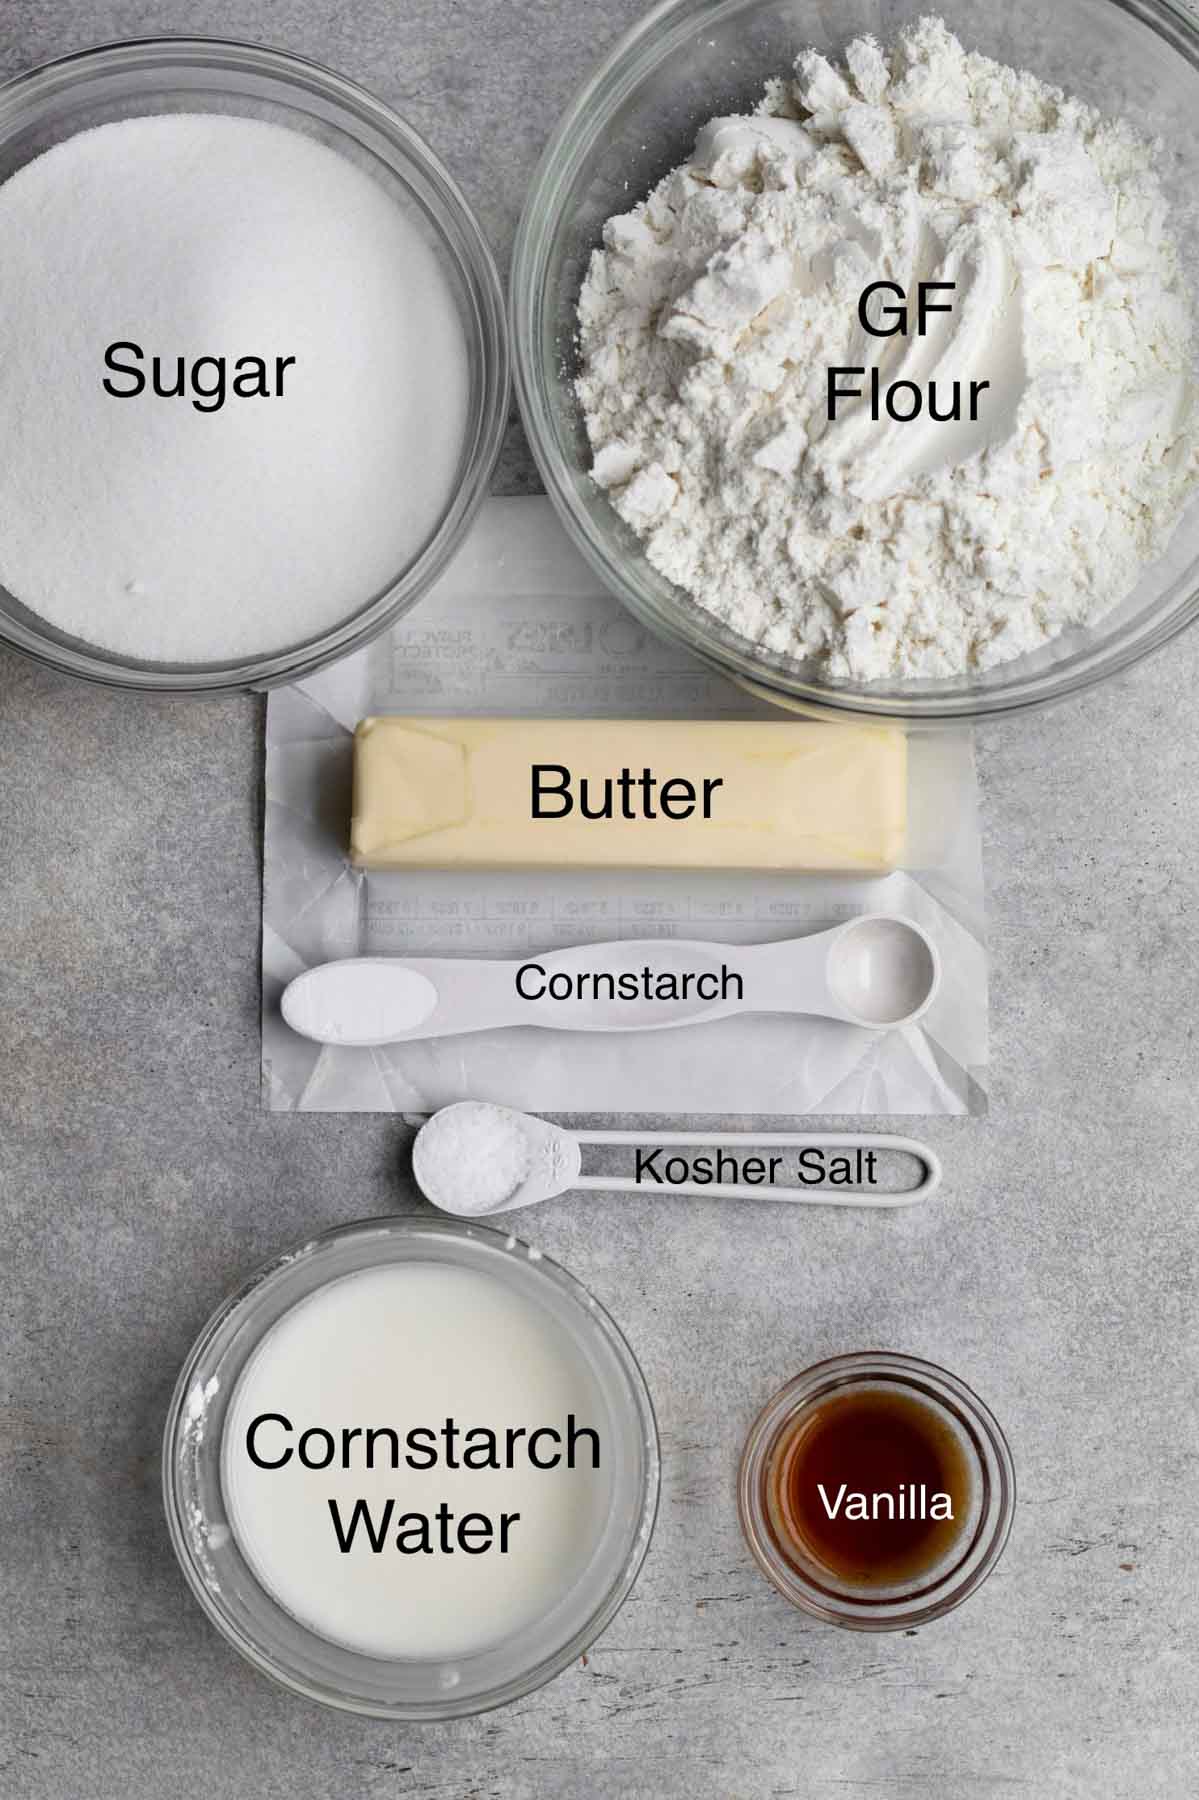 The ingredients for the sugar cookies in separate containers with their text names.